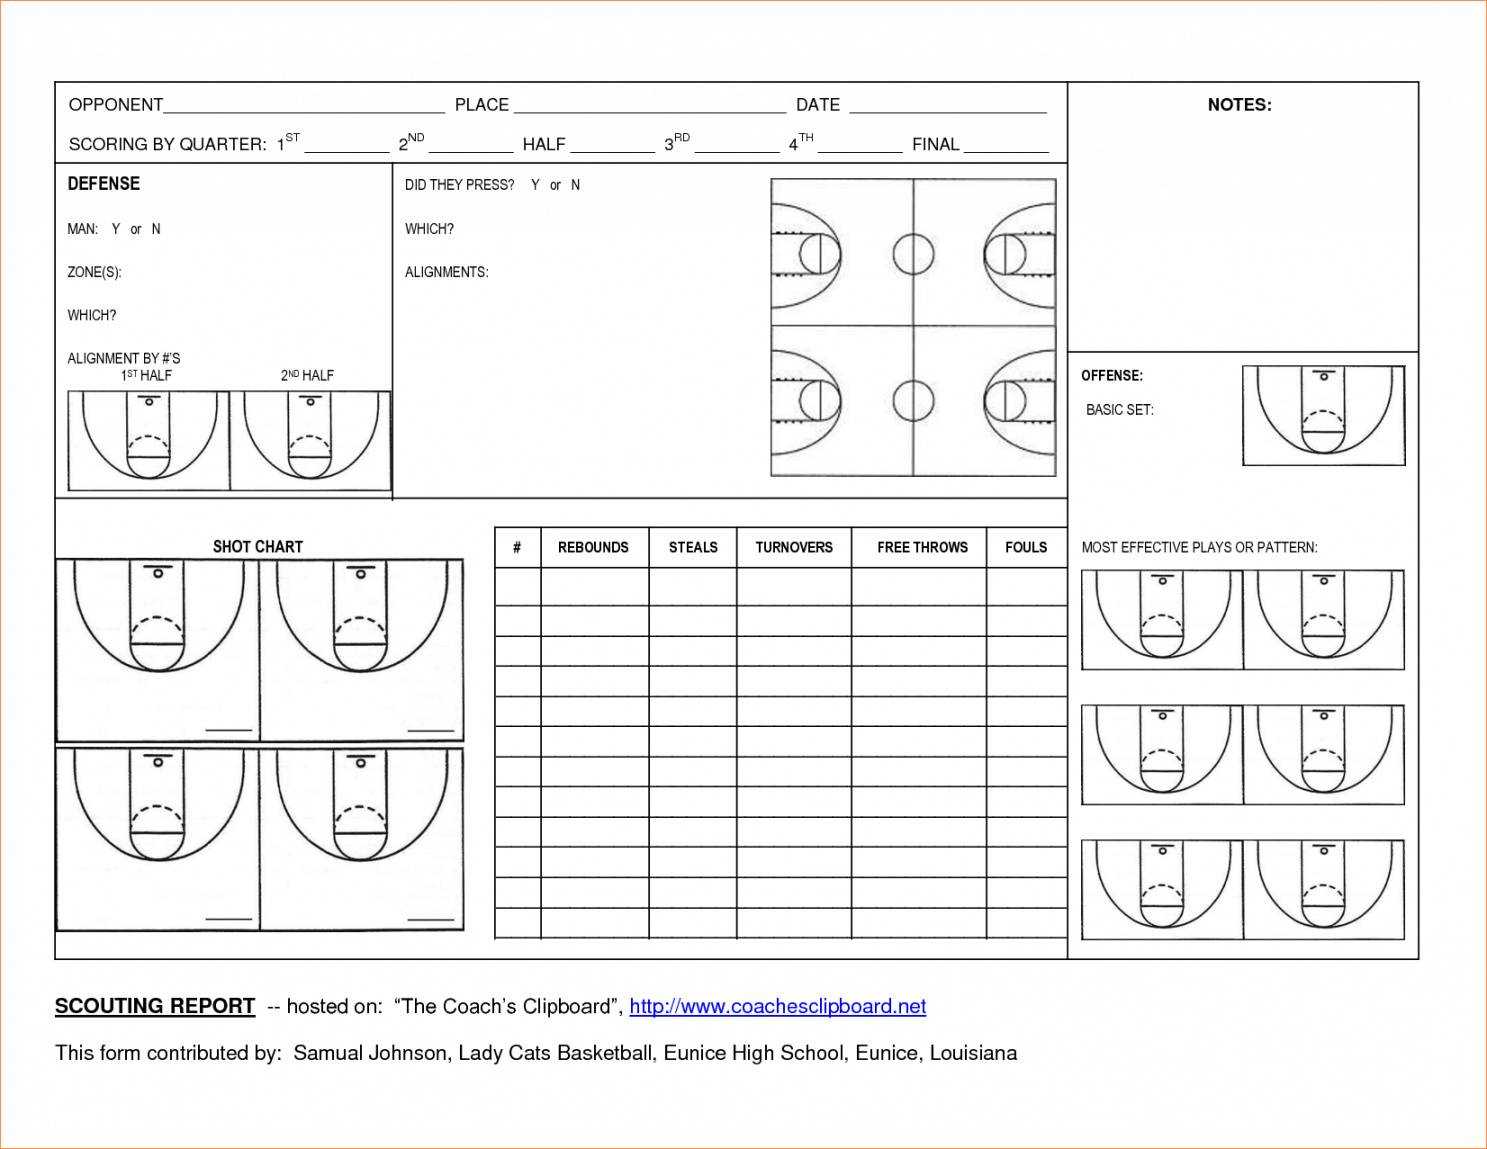 Editable Basketball Scouting Report Template Dltemplates With Regard To Scouting Report Basketball Template